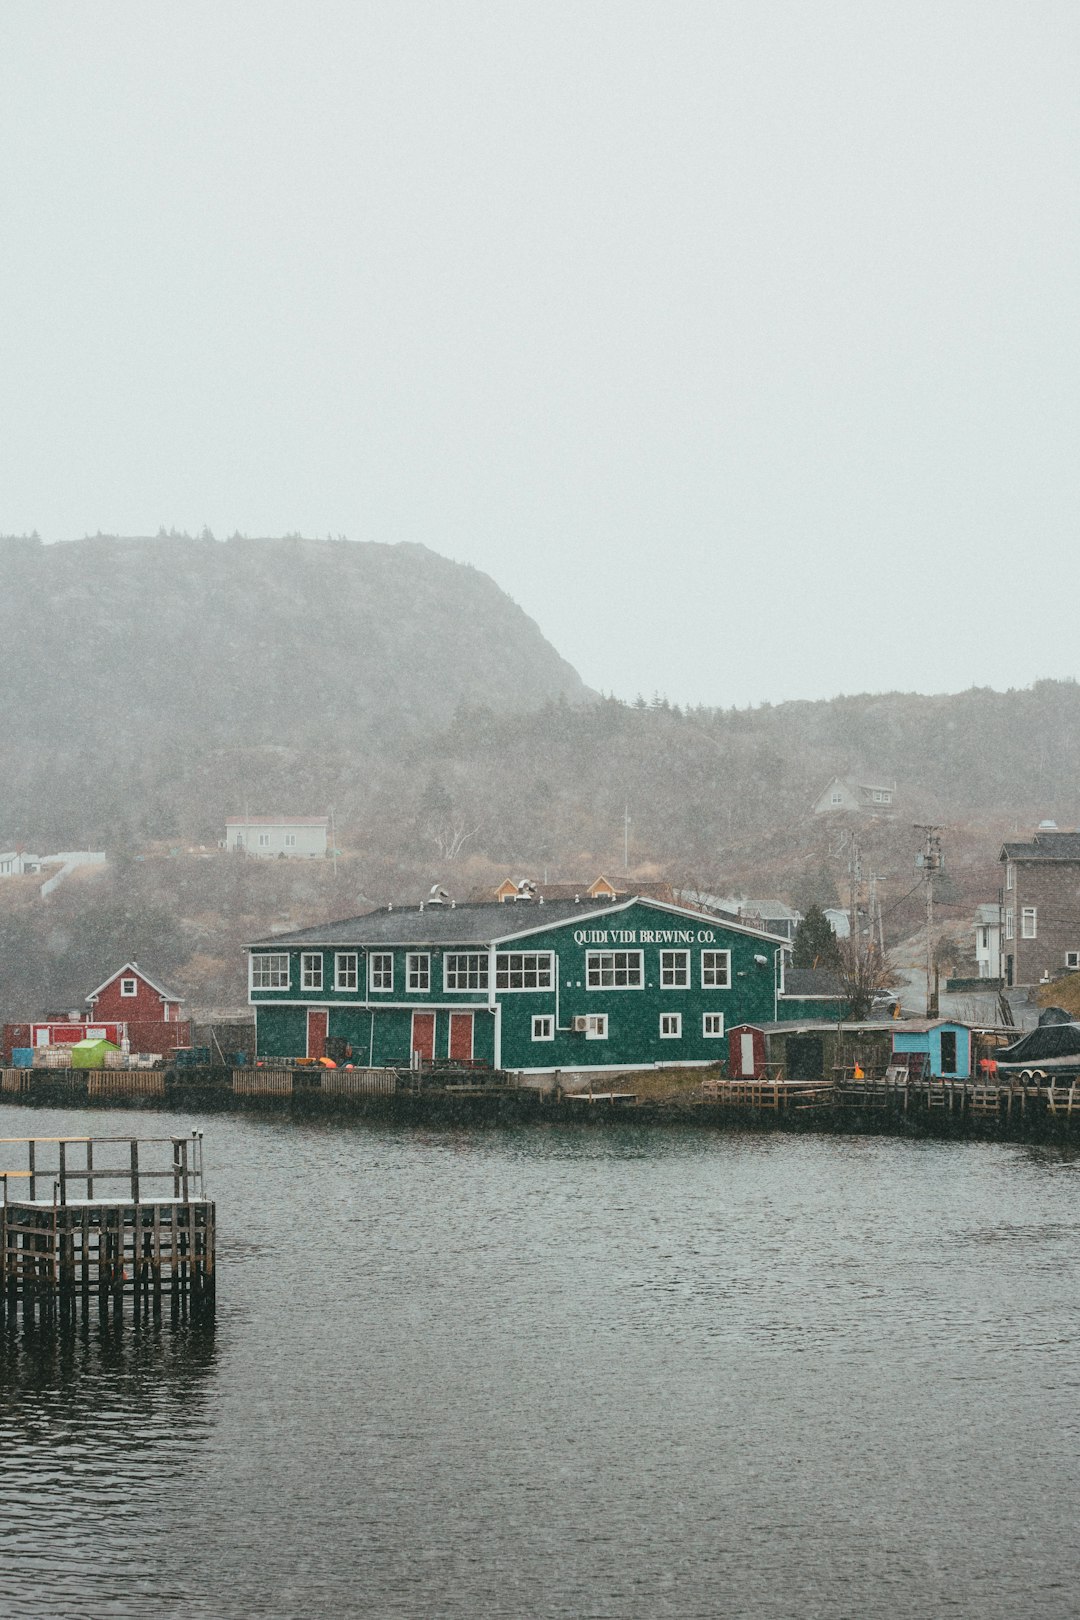 green and brown wooden houses beside body of water during daytime